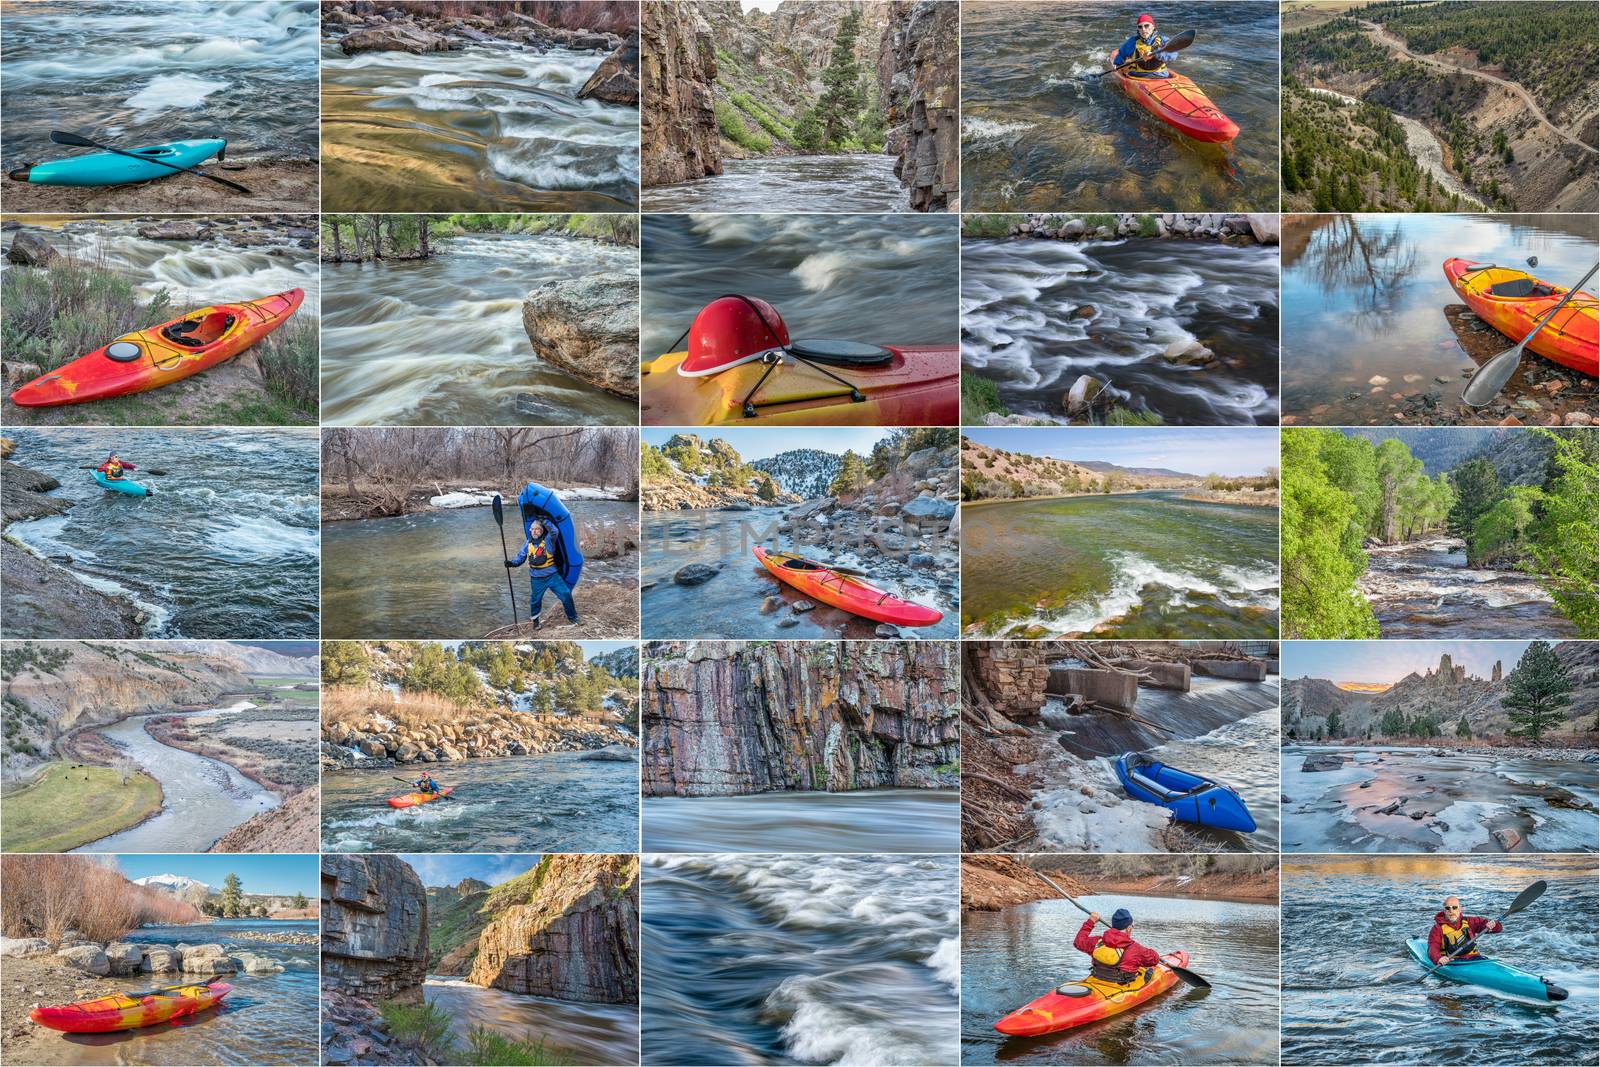 whitewater kayak and packraft  picture collection - paddling on mountain rivers in Colorado featuring the same male paddler